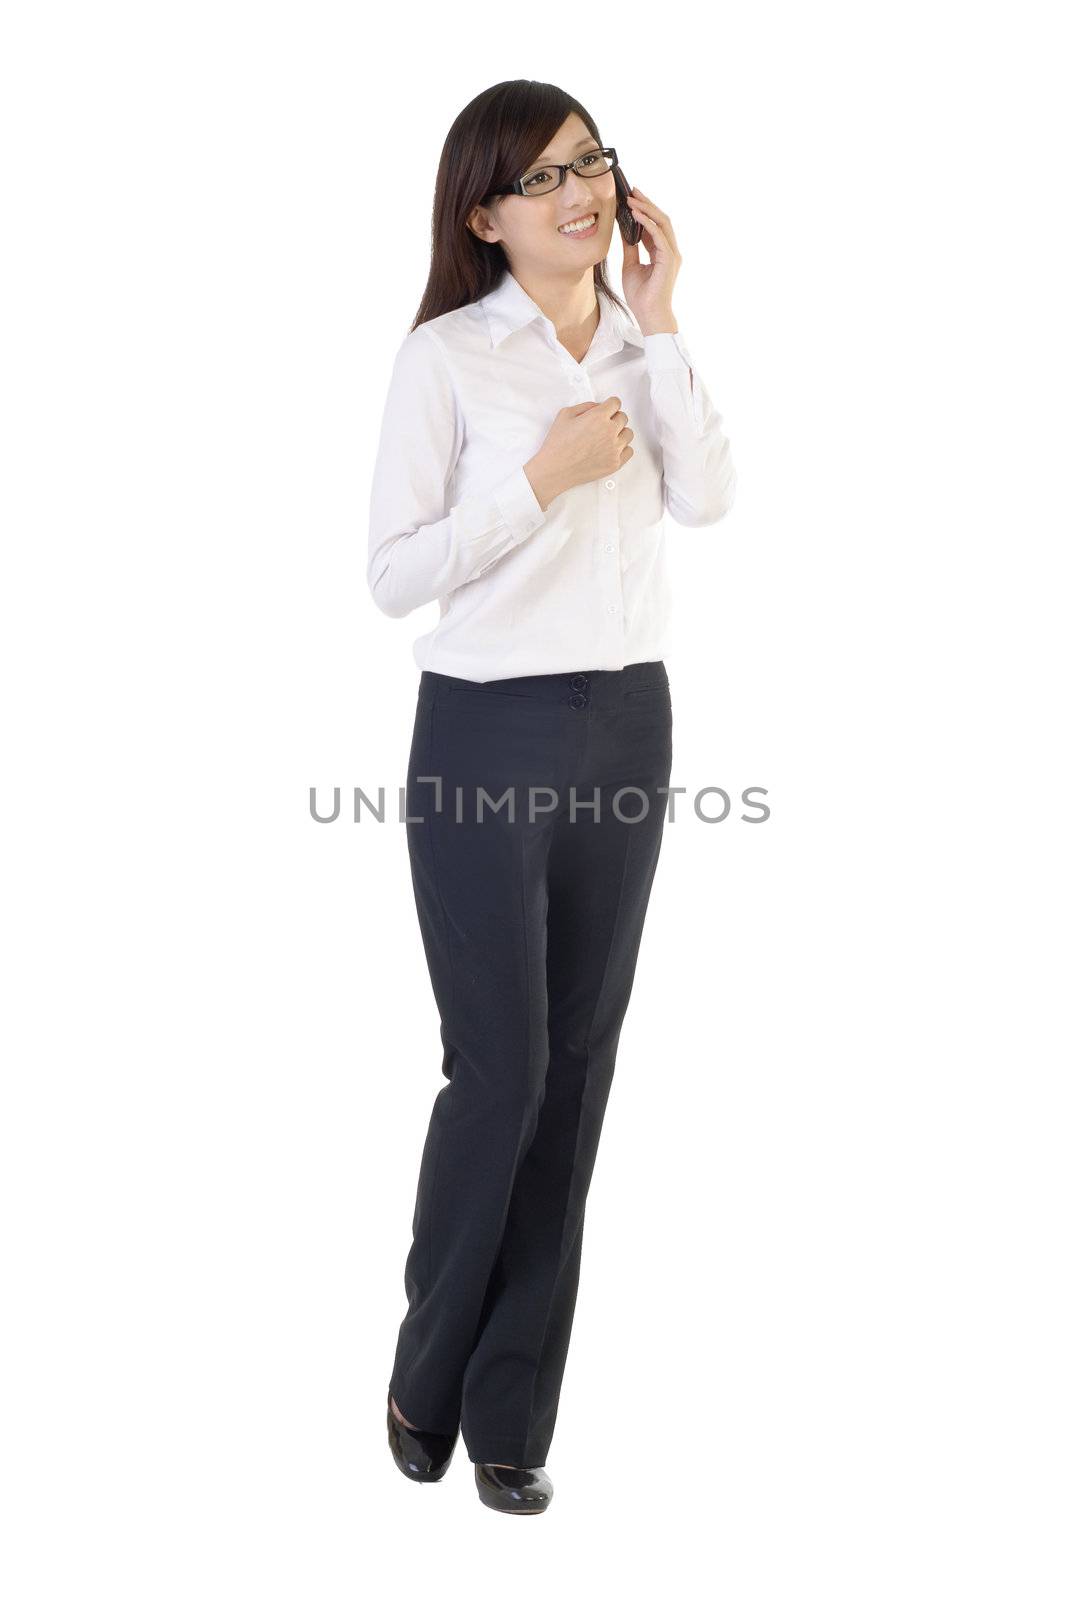 Asian business woman with cellphone by elwynn